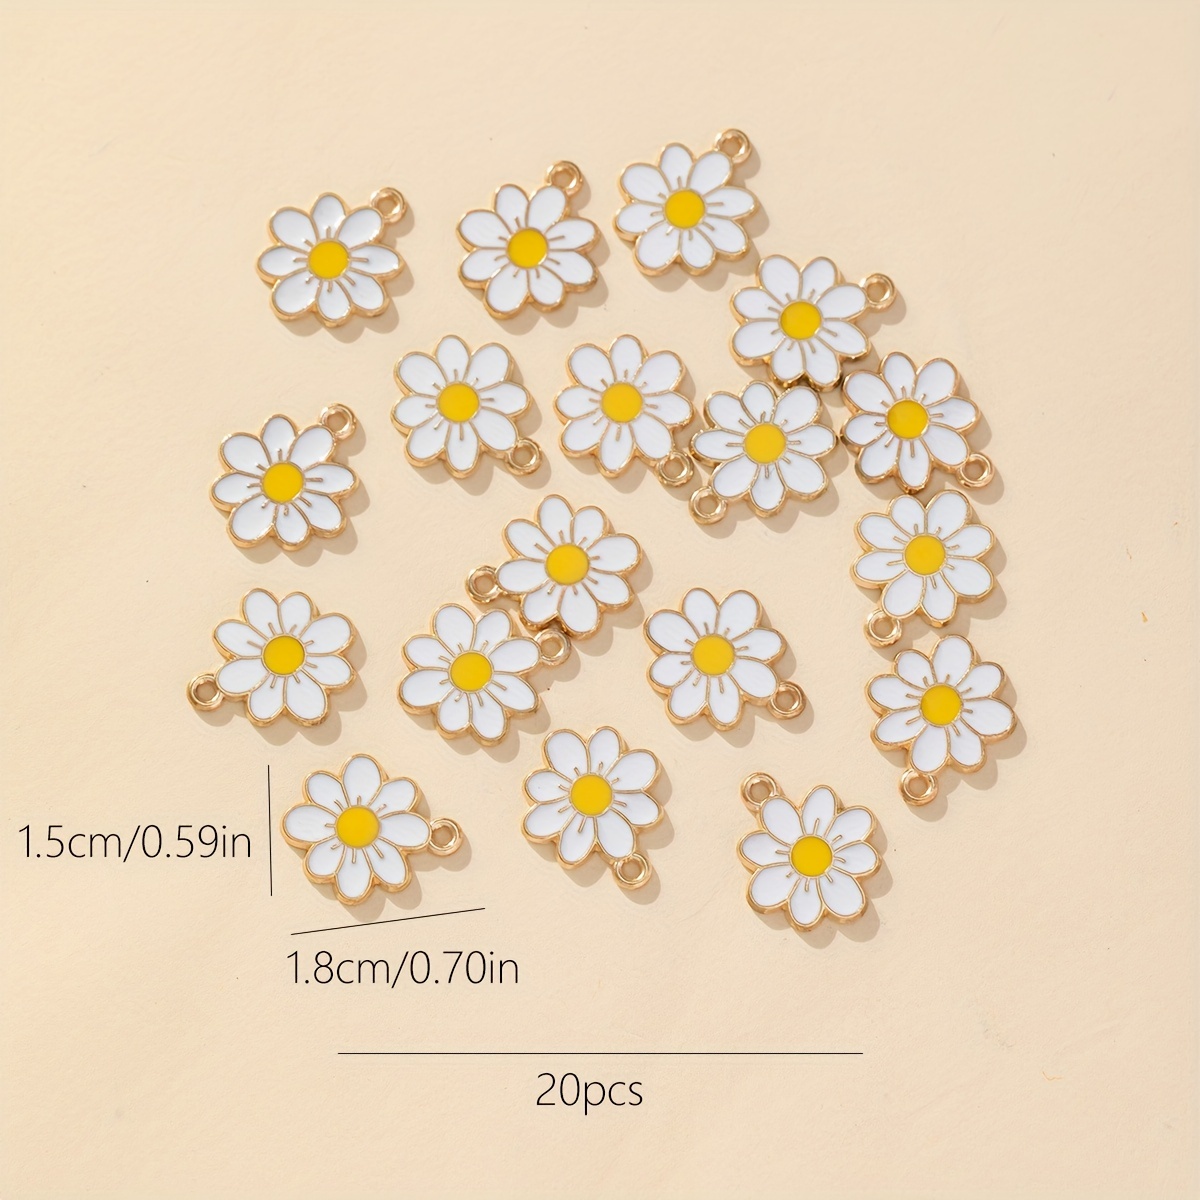 KitBeads 75pcs Mixed Style White Flower Charms Daisy Sunflower Cherry  Flower Charms Cute Cartoon Little Flower Charms for Jewelry Making Bracelets